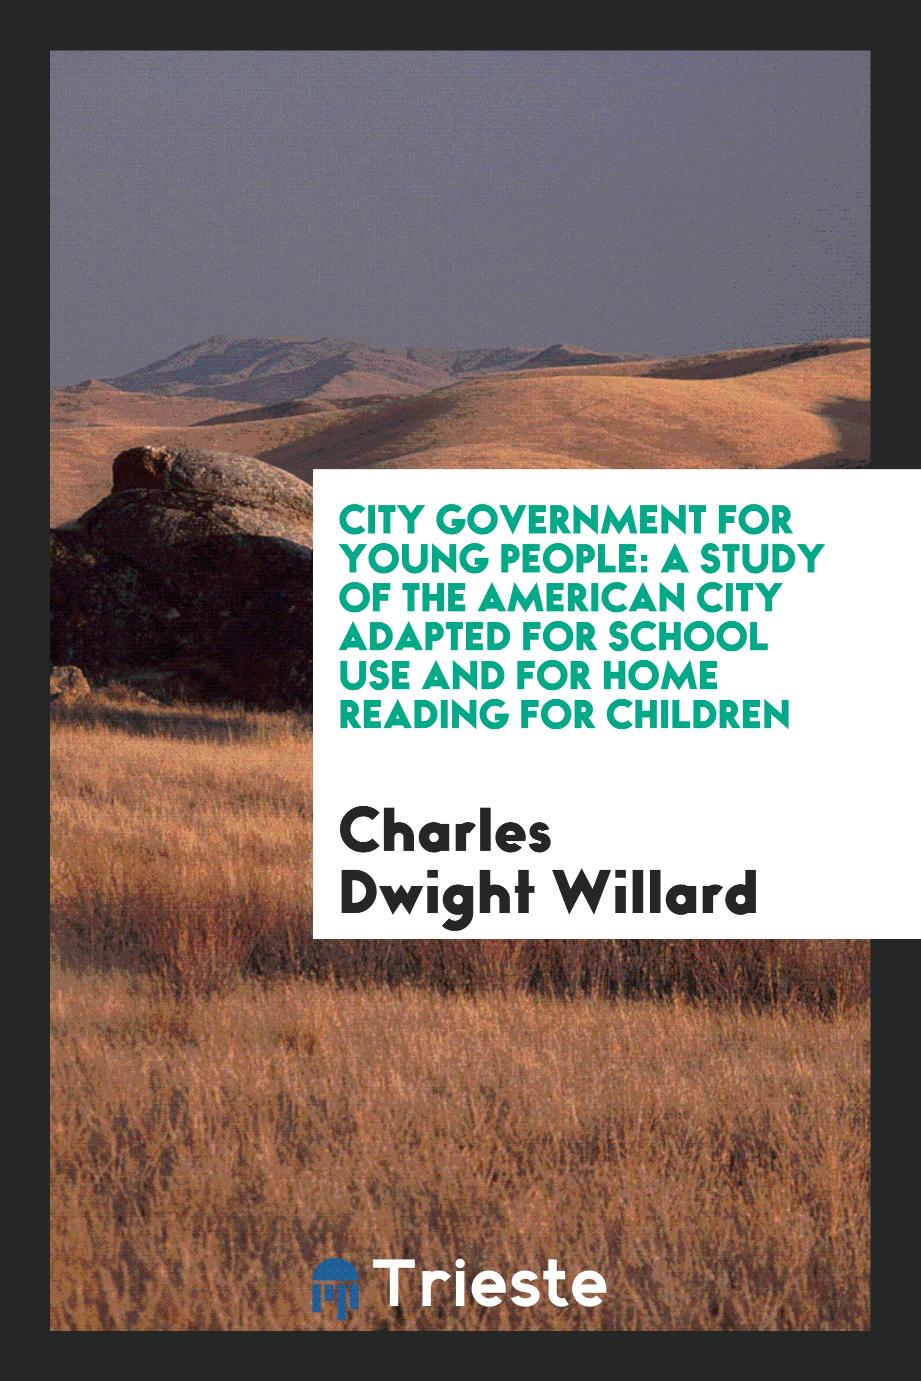 City Government for Young People: A Study of the American City Adapted for School Use and for Home Reading for Children